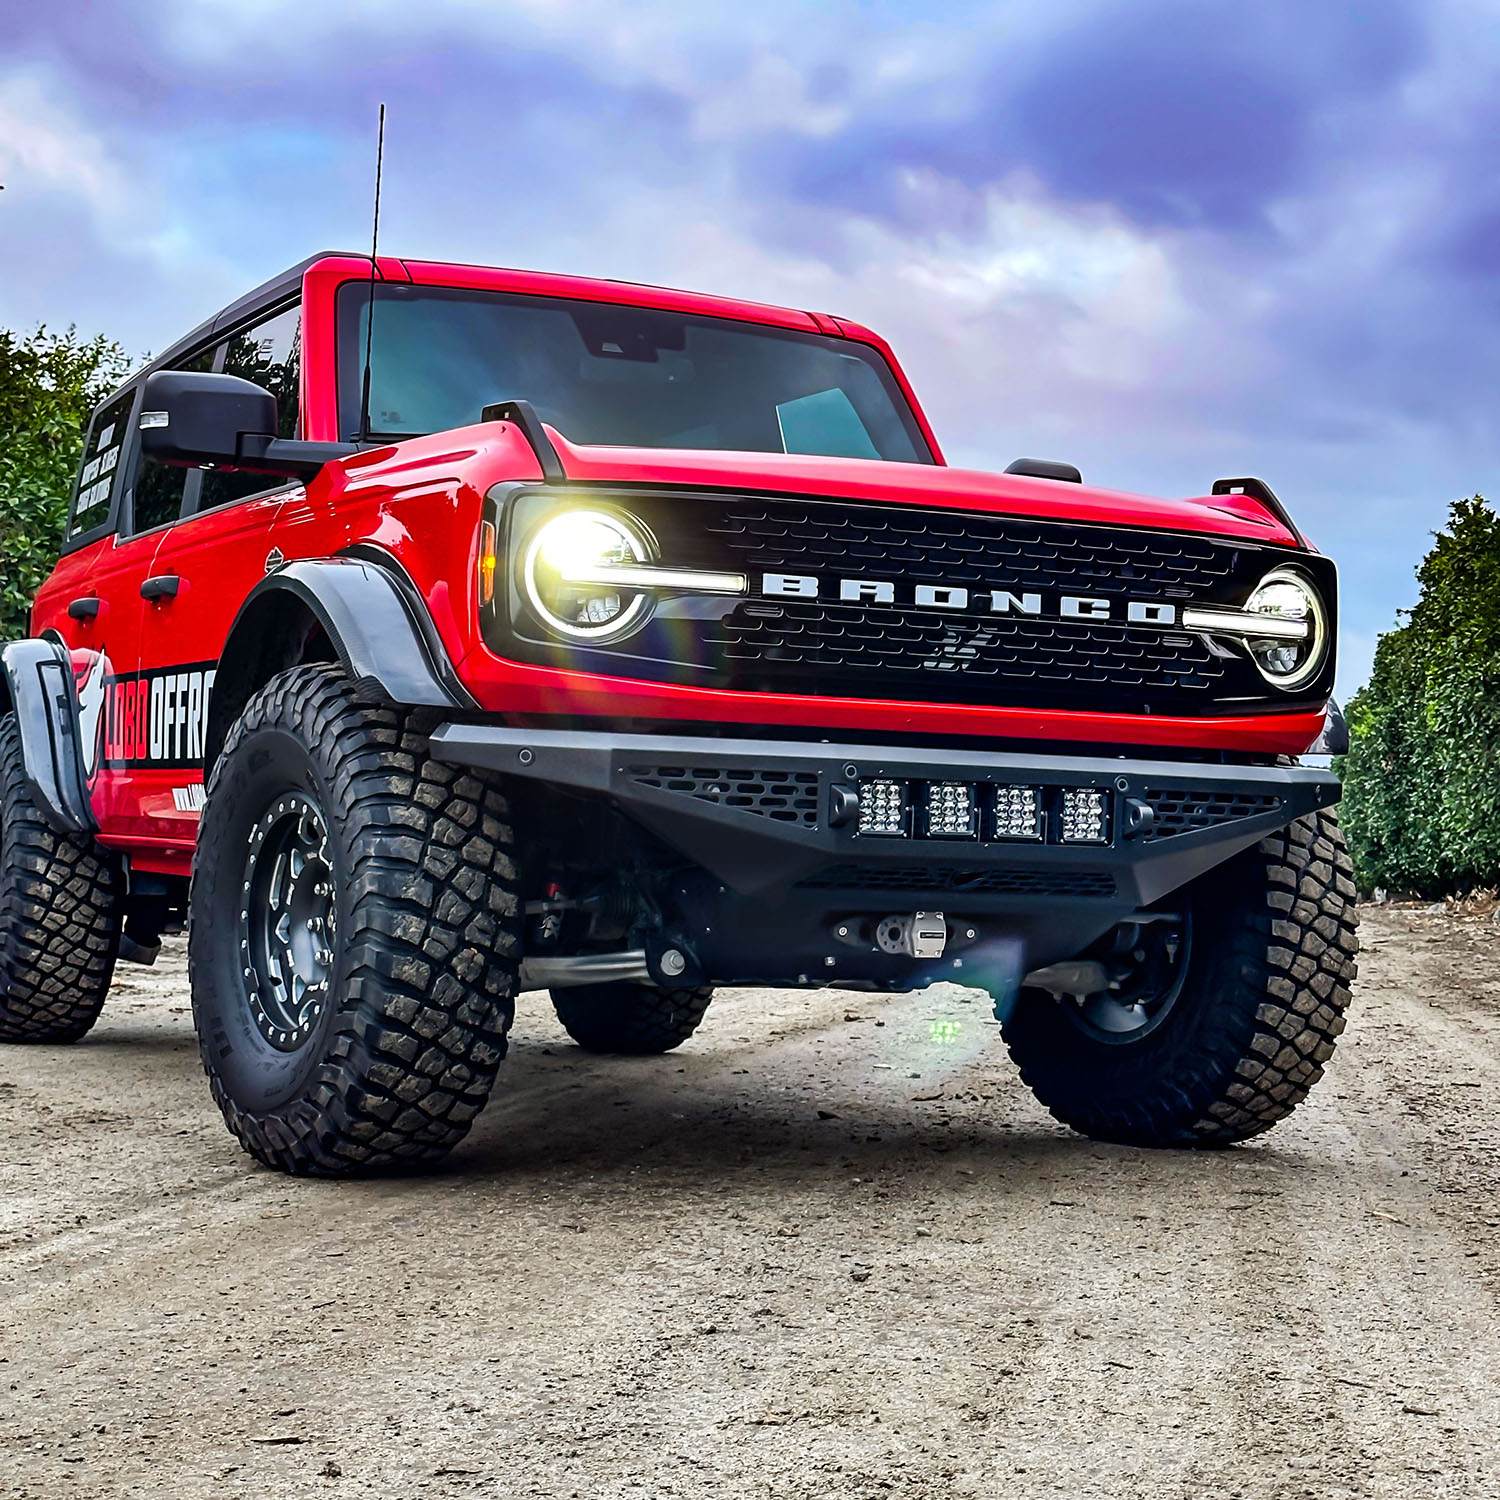 Ford Bronco Lobo Off-Road HNT Hidden Winch Skid 2.7L Mount Kit Now Available! image9x-1500sq